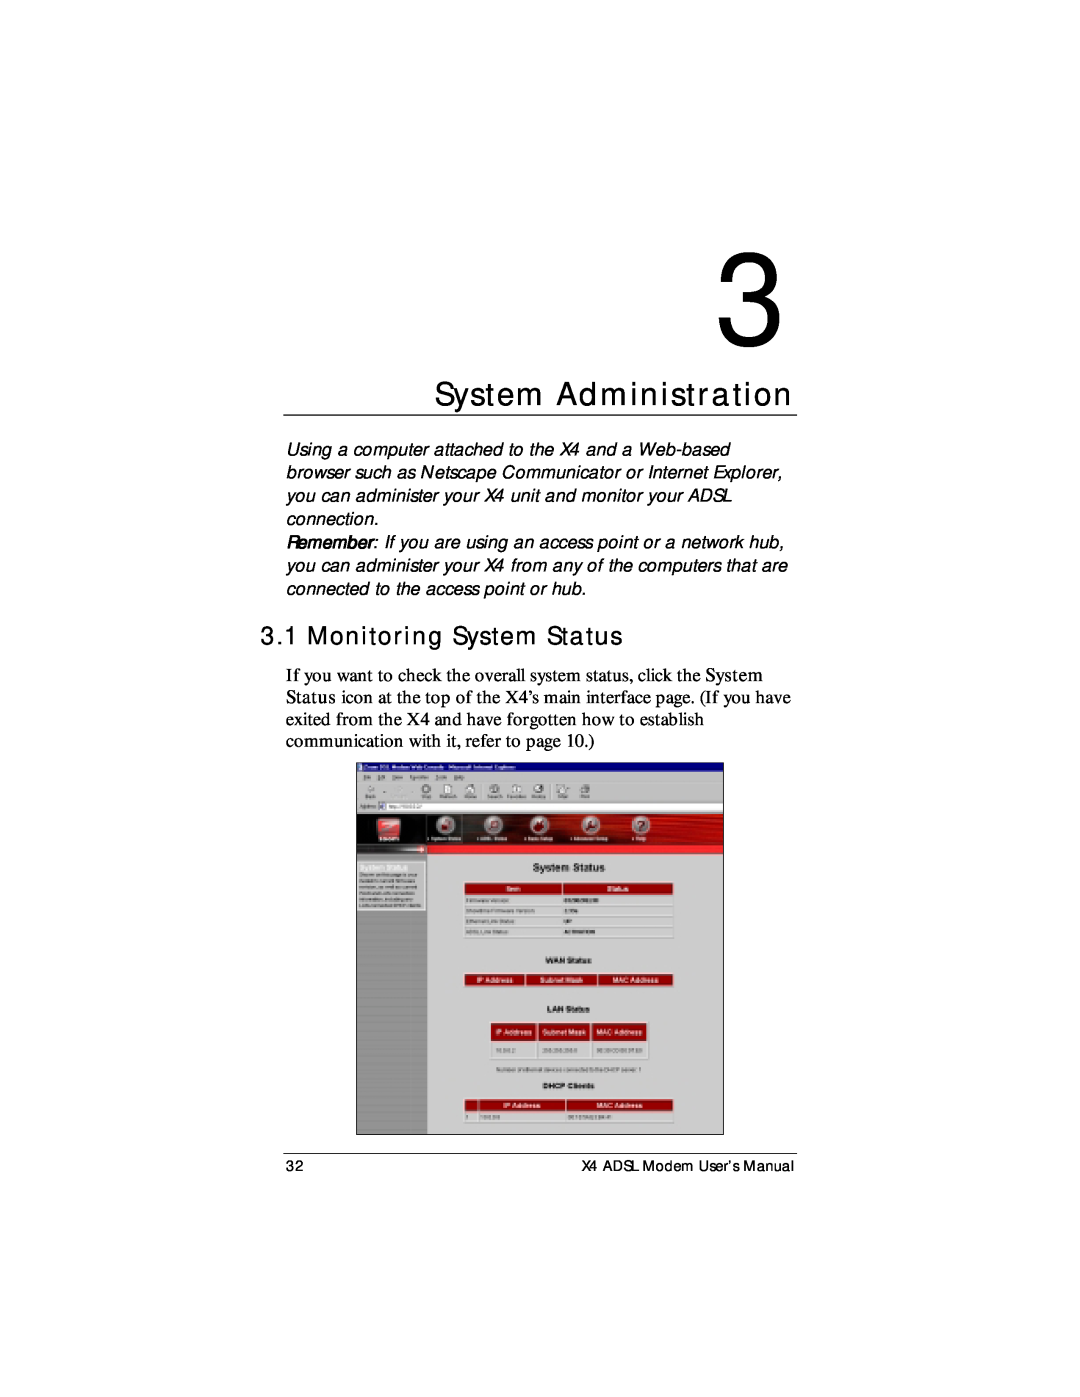 Zoom X4 manual System Administration, Monitoring System Status 